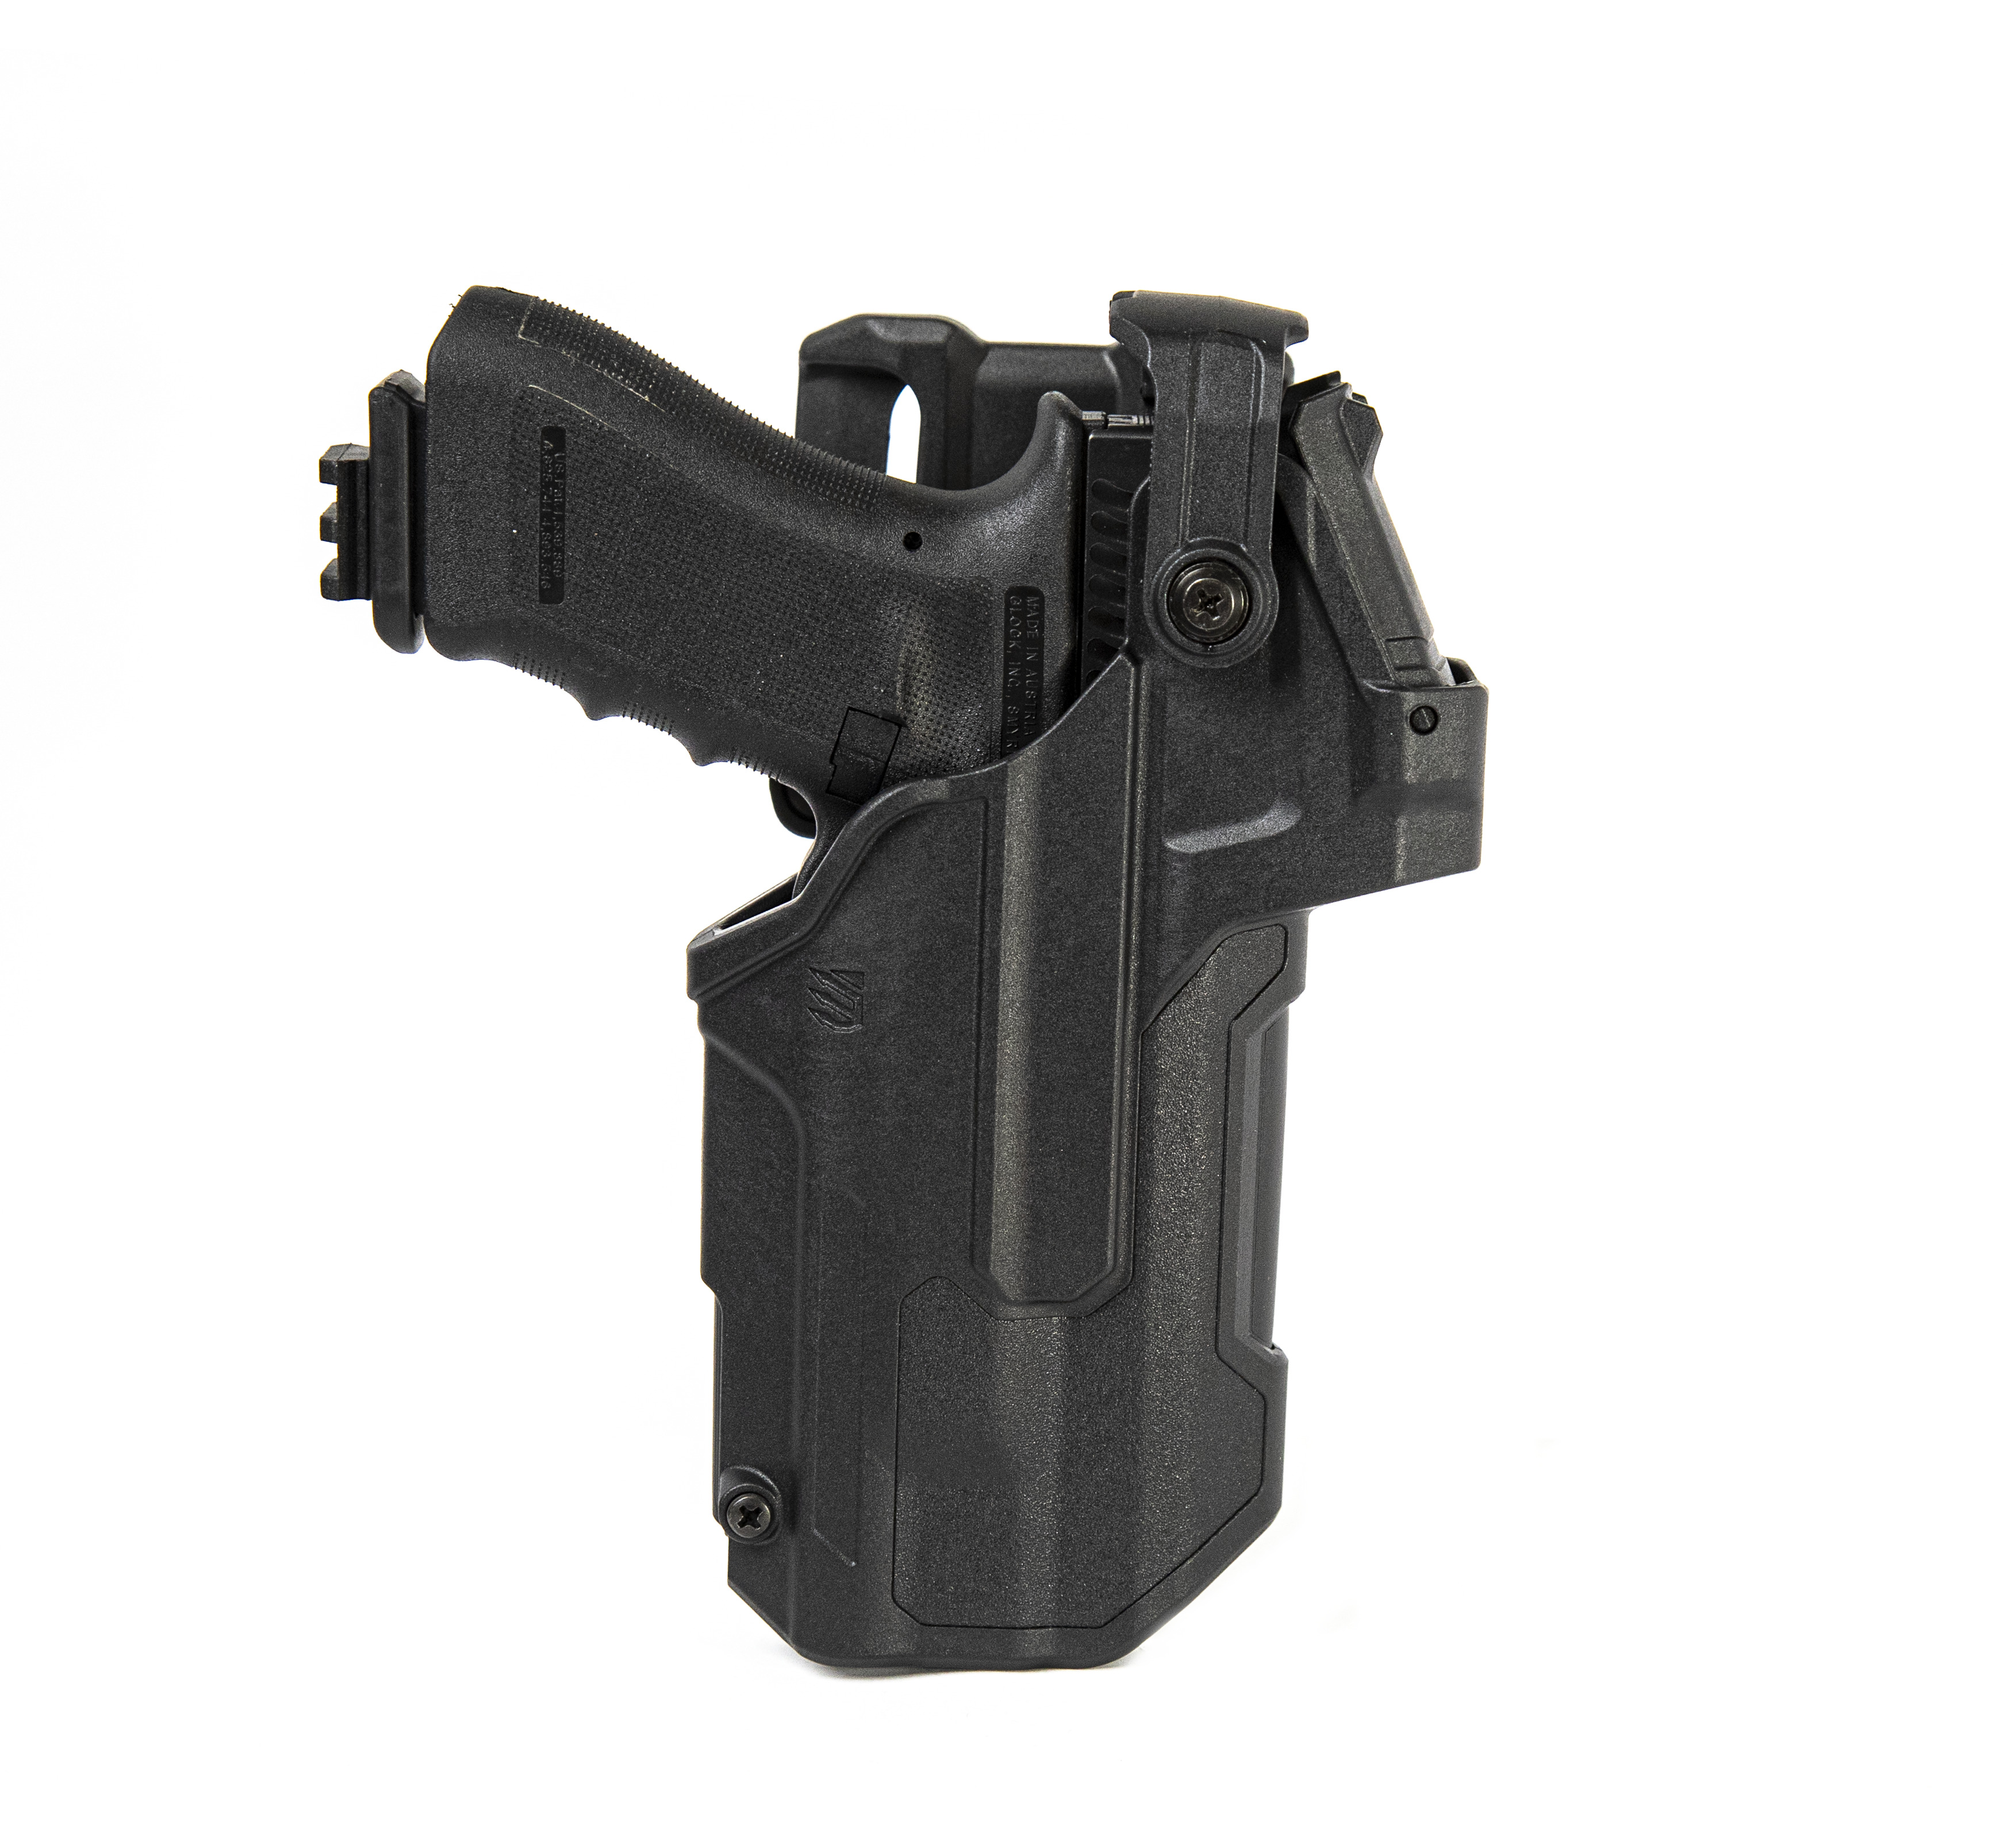 Buy T-Series Level 3 Duty Light-Bearing Red Dot Sight Holster And